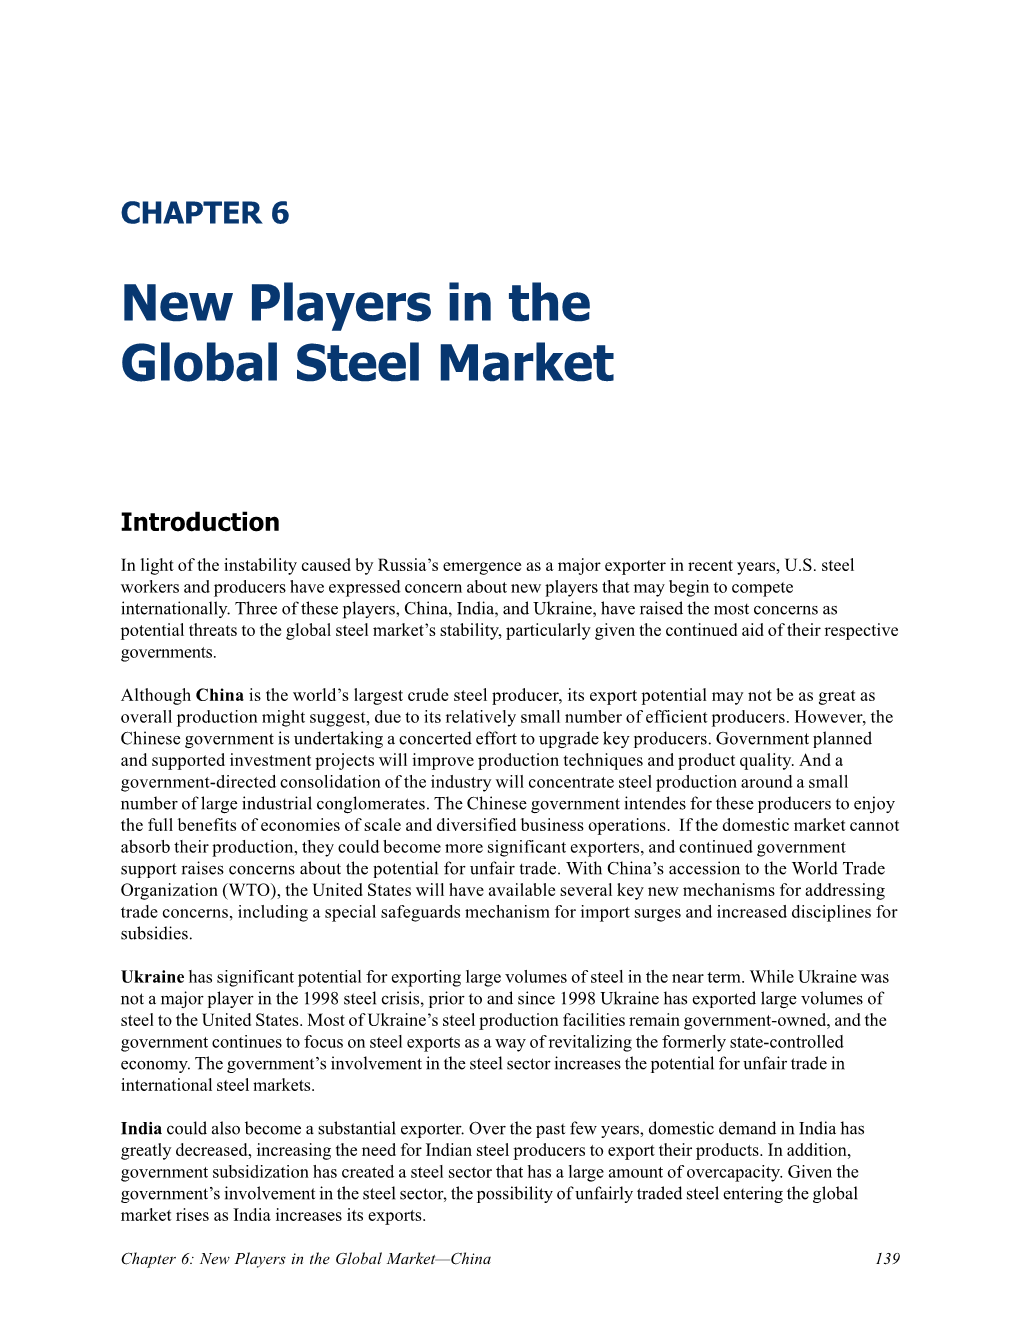 New Players in the Global Steel Market